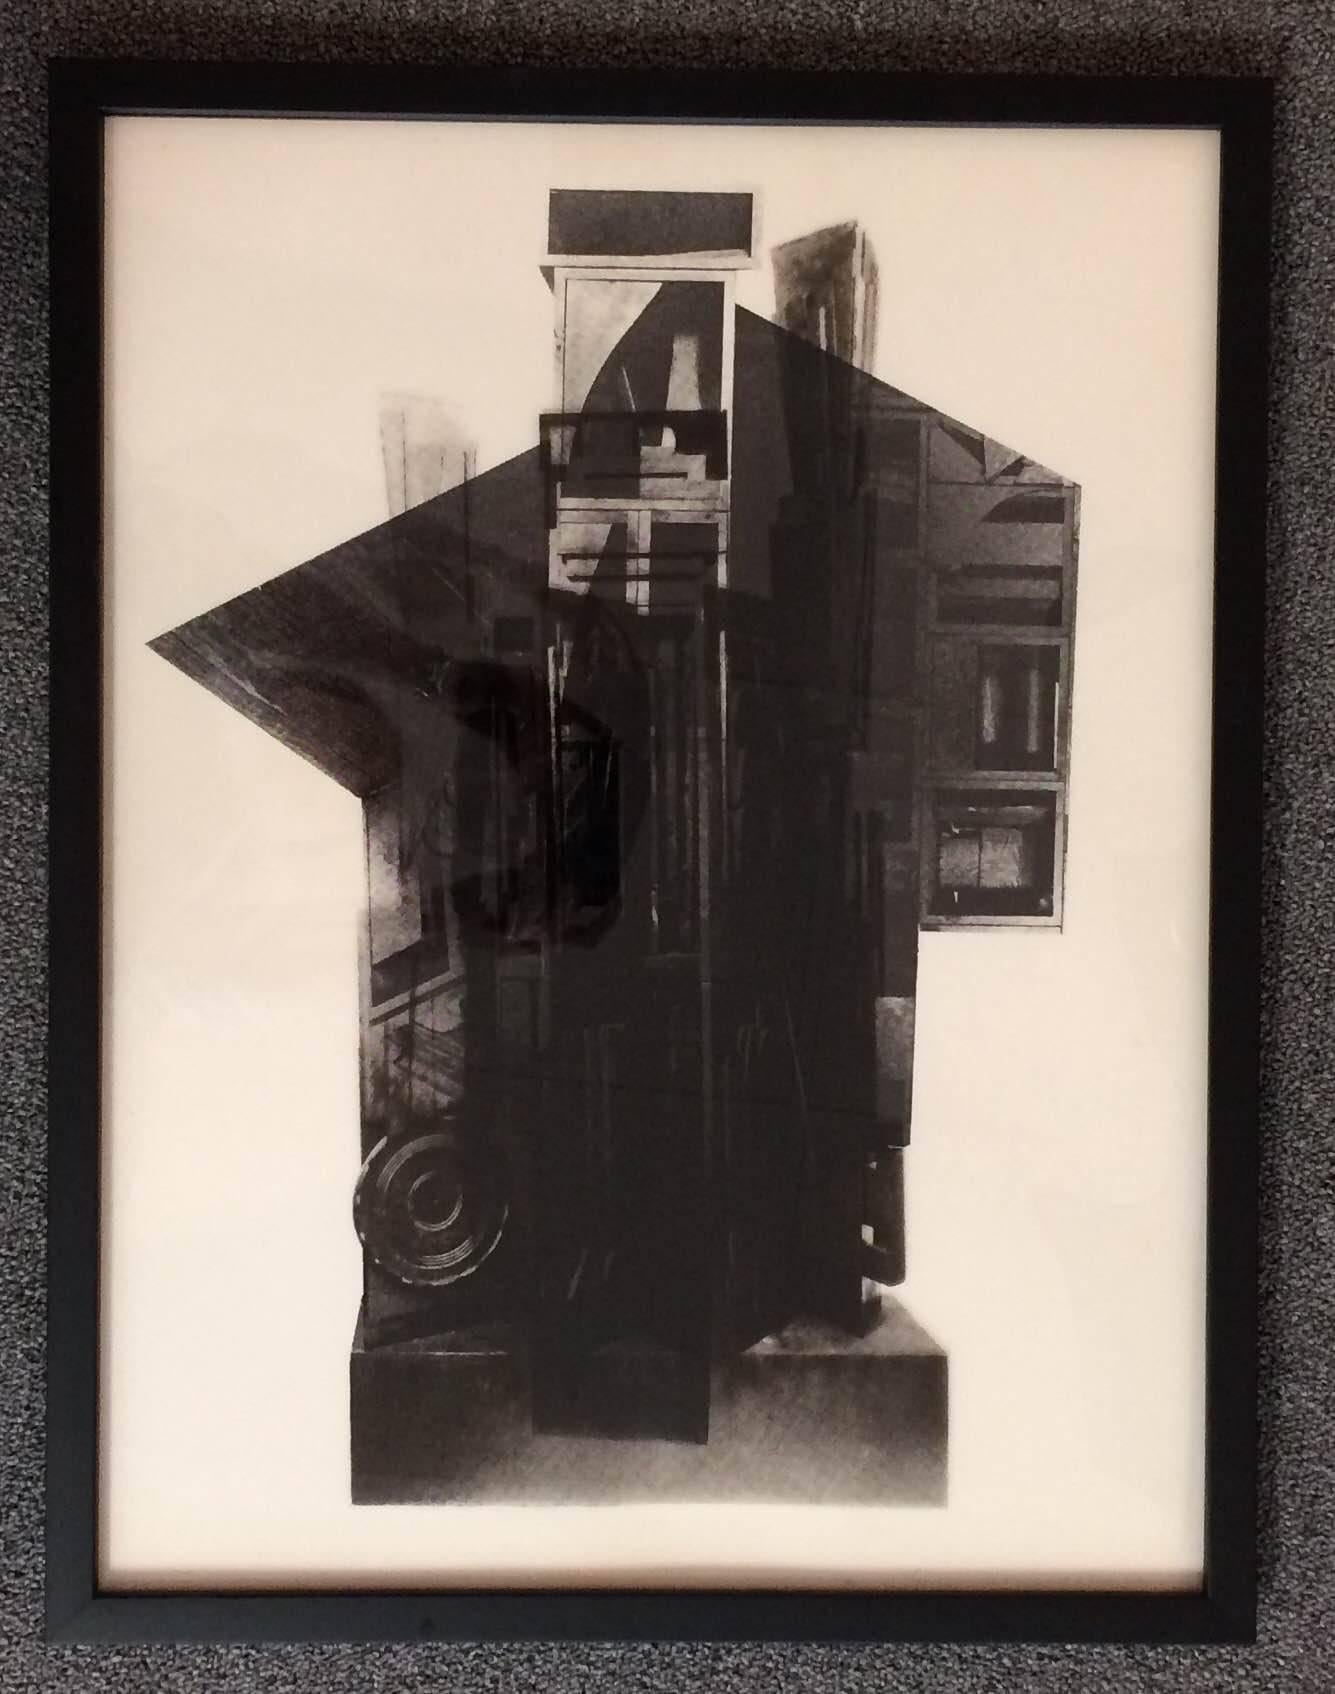 1966
Mixed media
22.75'' x 17''
Framed
ed. 125

Louise Nevelson was an American sculptor known for her monumental, monochromatic, wooden wall pieces and outdoor sculptures. Born in Czarist Russia, she was a creator of wood assemblages made